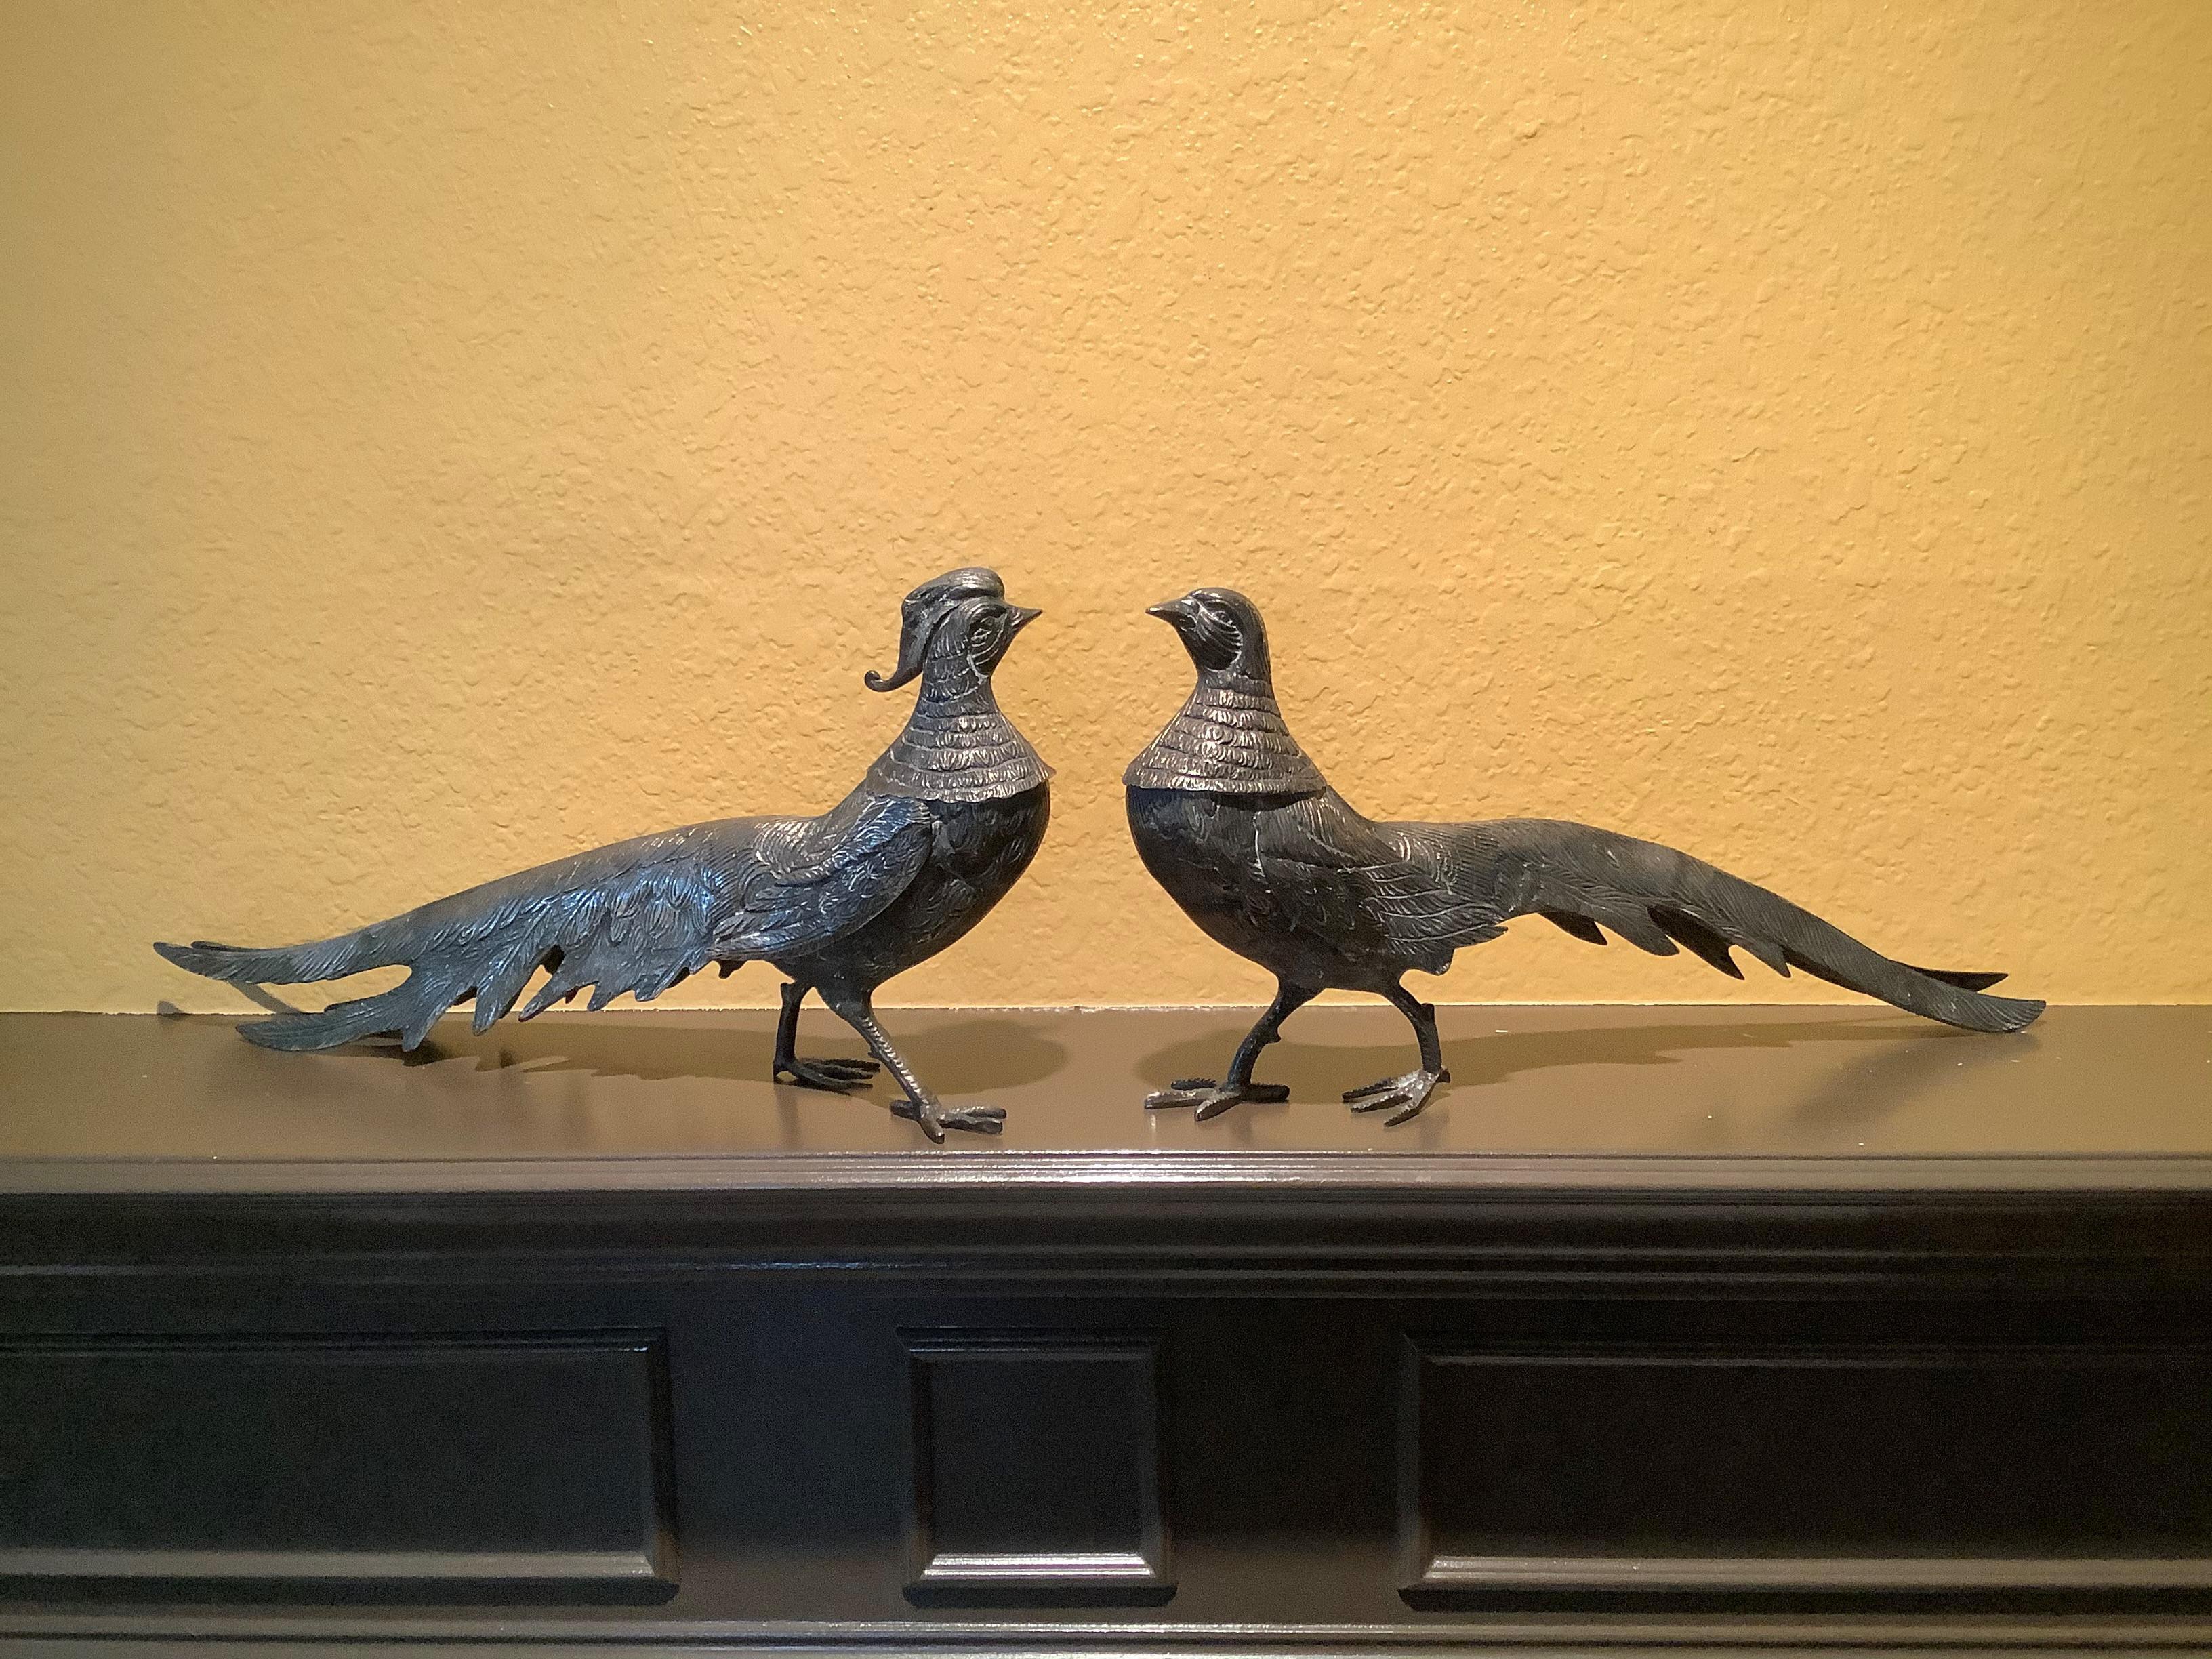 A stunning one-of-a-kind pair of unusually large, silver-plated peacocks -- Great for a mantle, holiday table centerpiece, coffee table, or even as bookends. This pair of birds is classic Hollwood Regency! They are each unique from one-another with